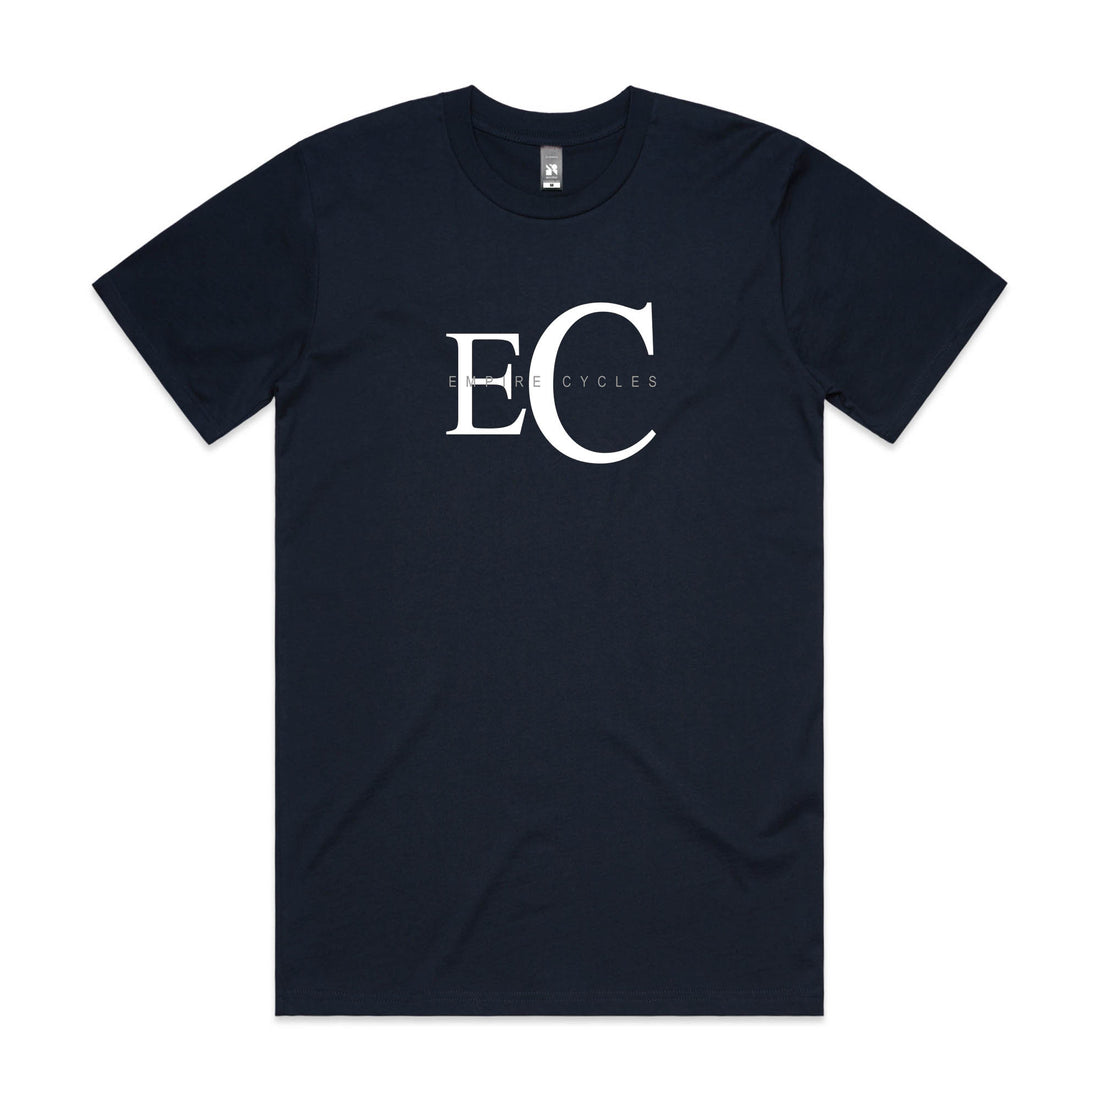 Empire Cycles ECKlein T-Shirt